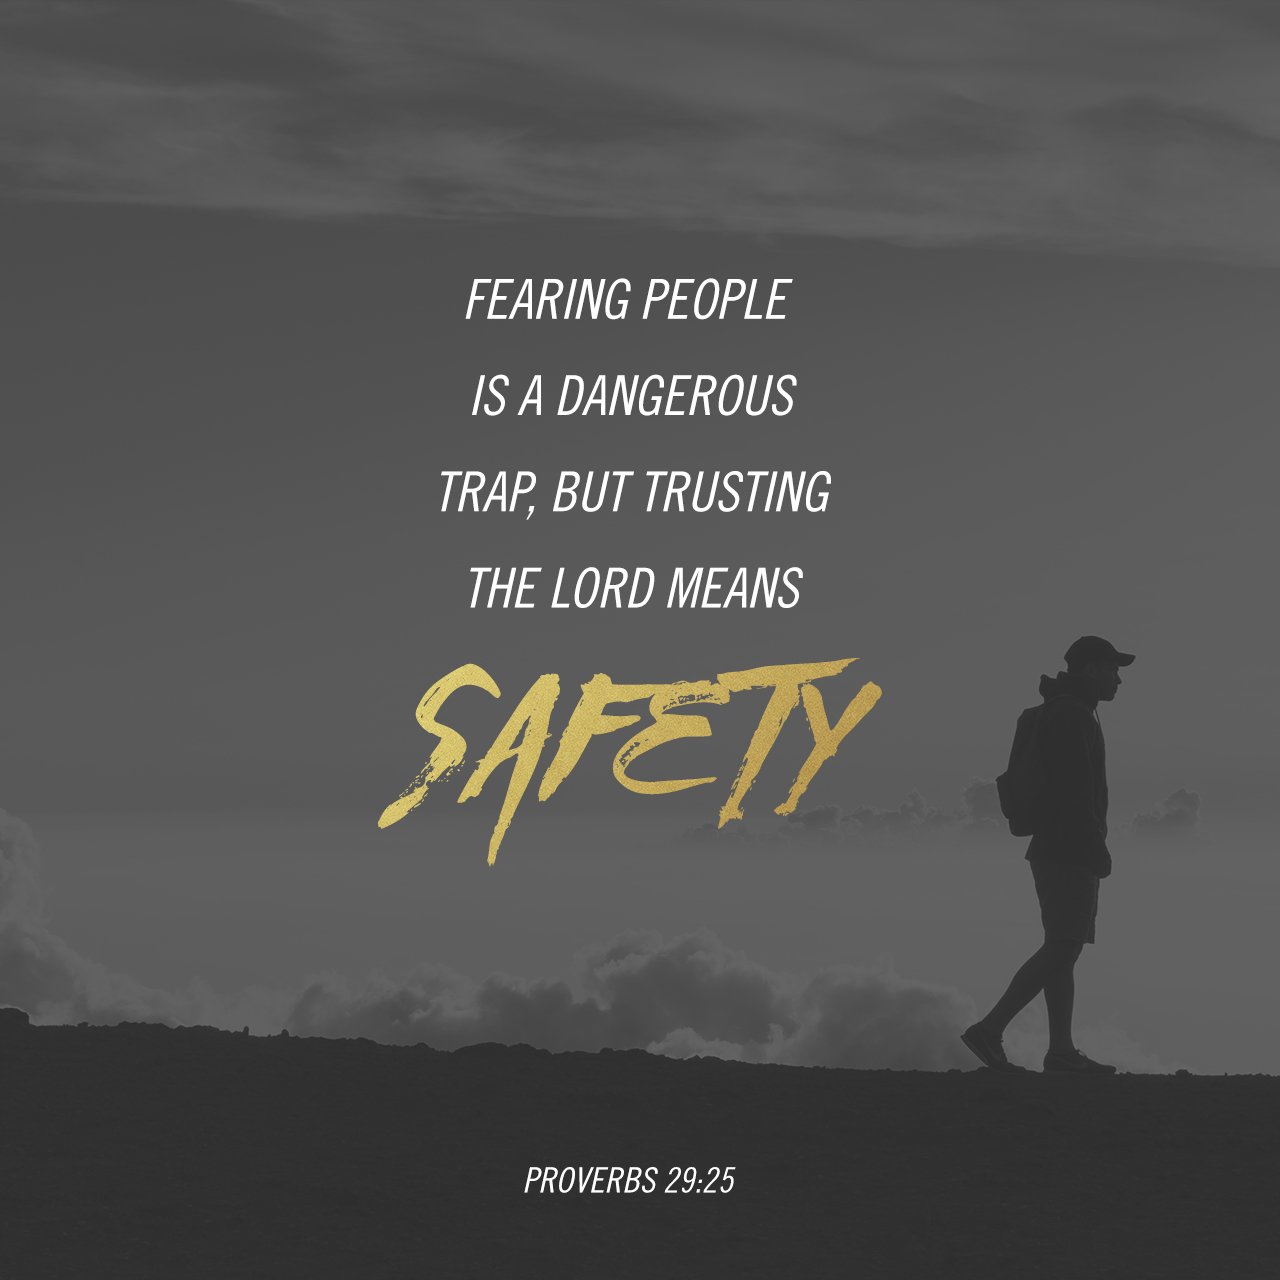 FEARING PEOPLE IS A DANGEROUS TRAP; BUT TRUSTING THE LORD MEANS SAraTy PROVERBS 29.25